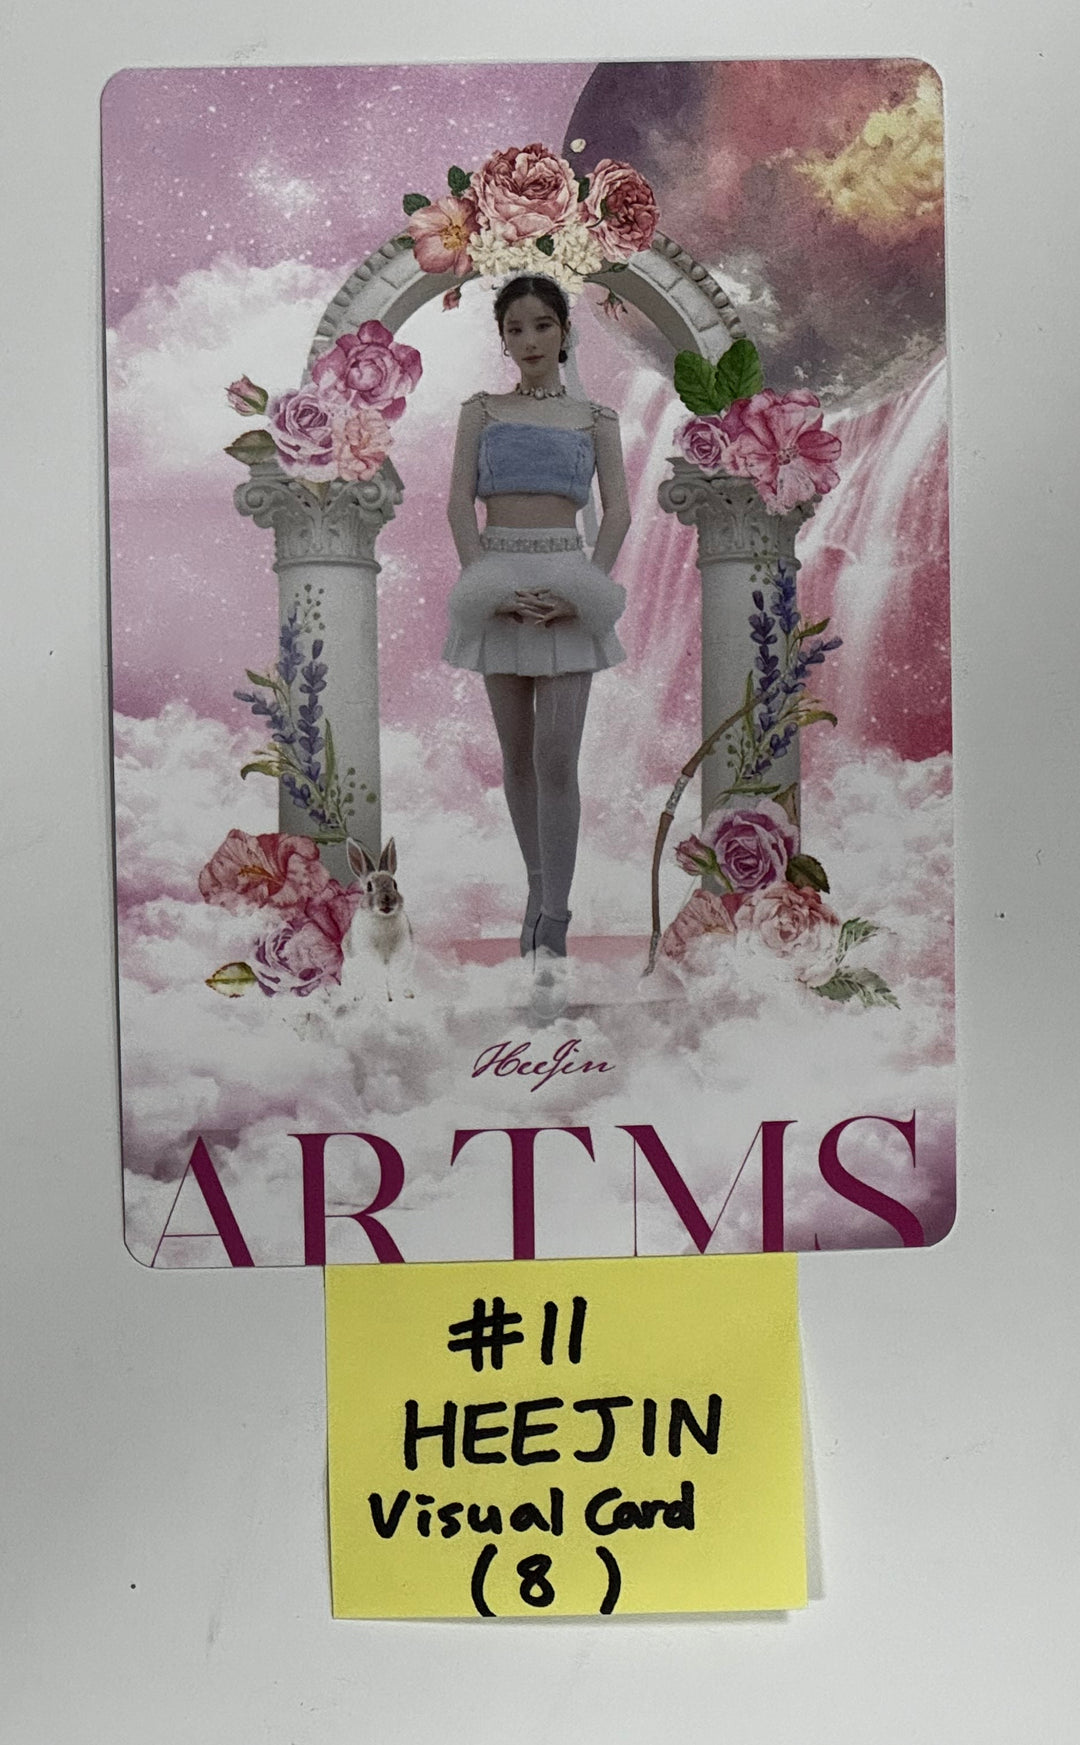 Artms "DALL" - Official Postcard(Clear Photocard, I.D Picture, Postcard) [24.06.04]